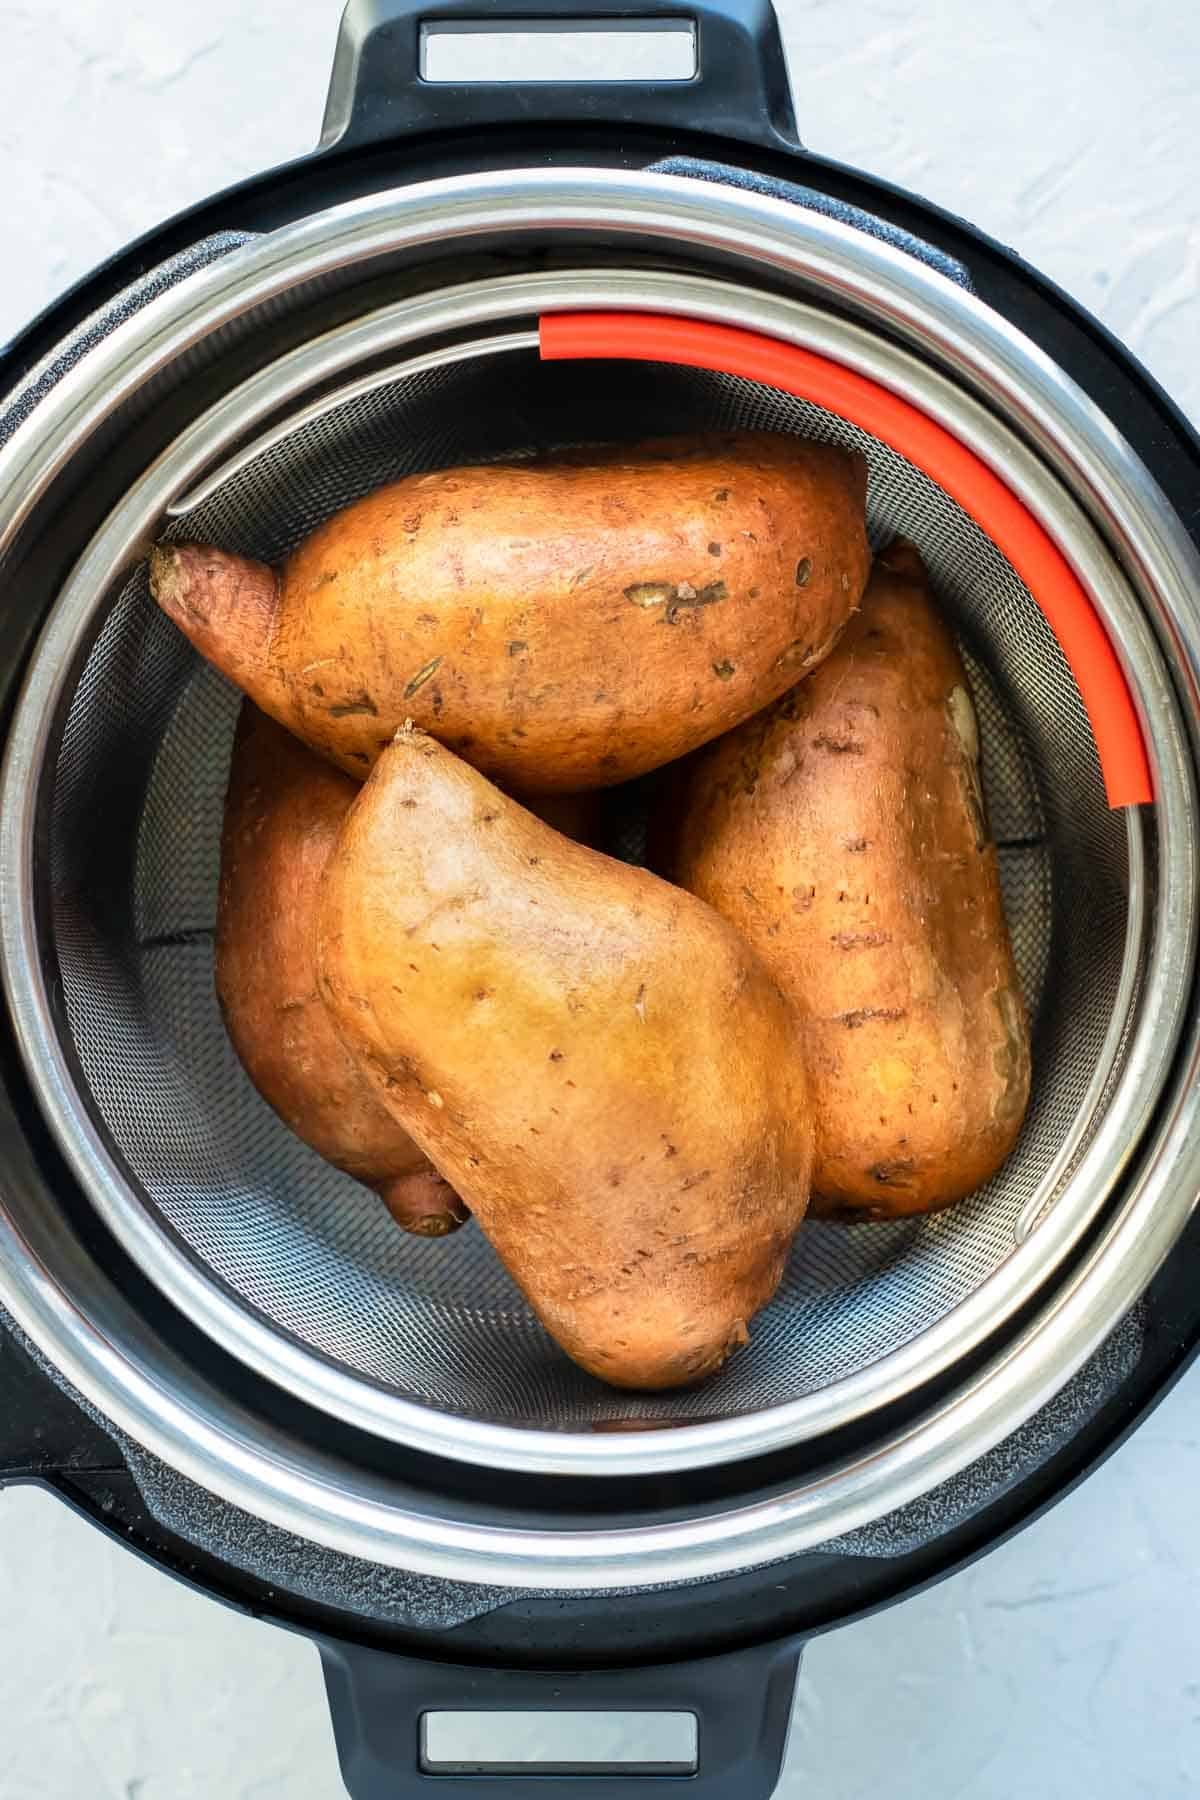 Sweet Potato in Instant Pot with steamer basket.